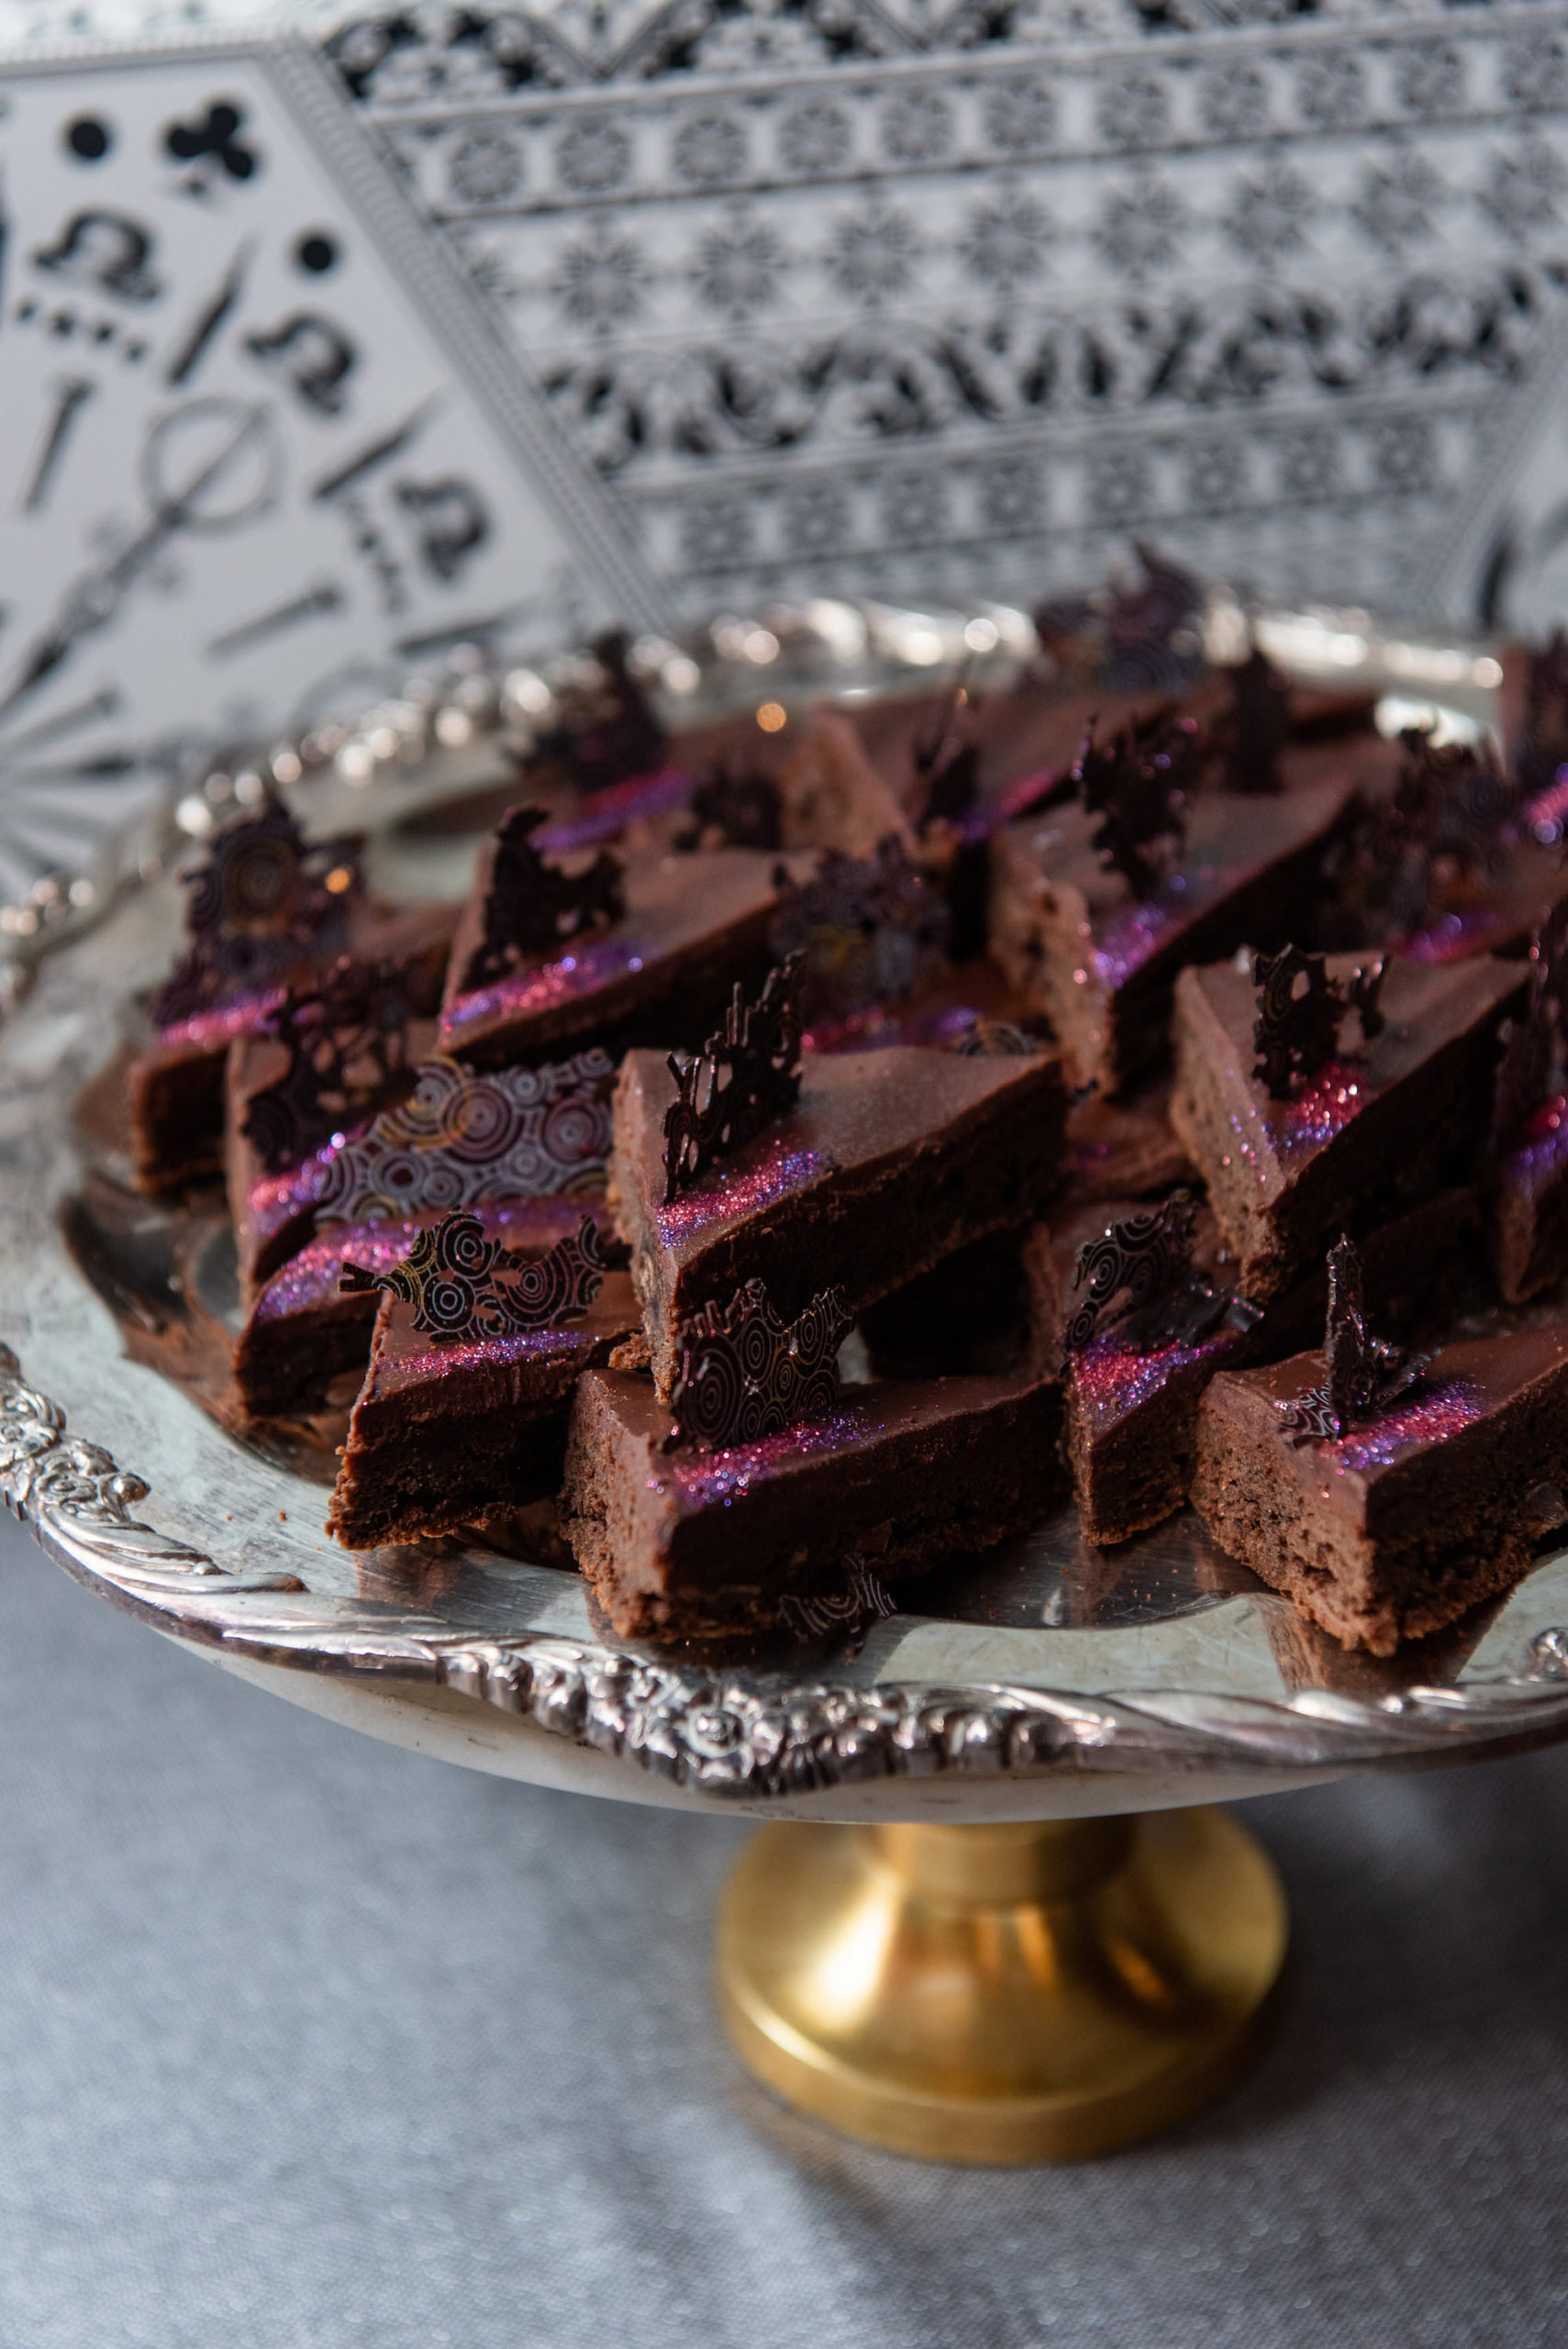 Edible Glitter Brownies with Creative Chocolate Decor Dessert by The Artistic Whisk